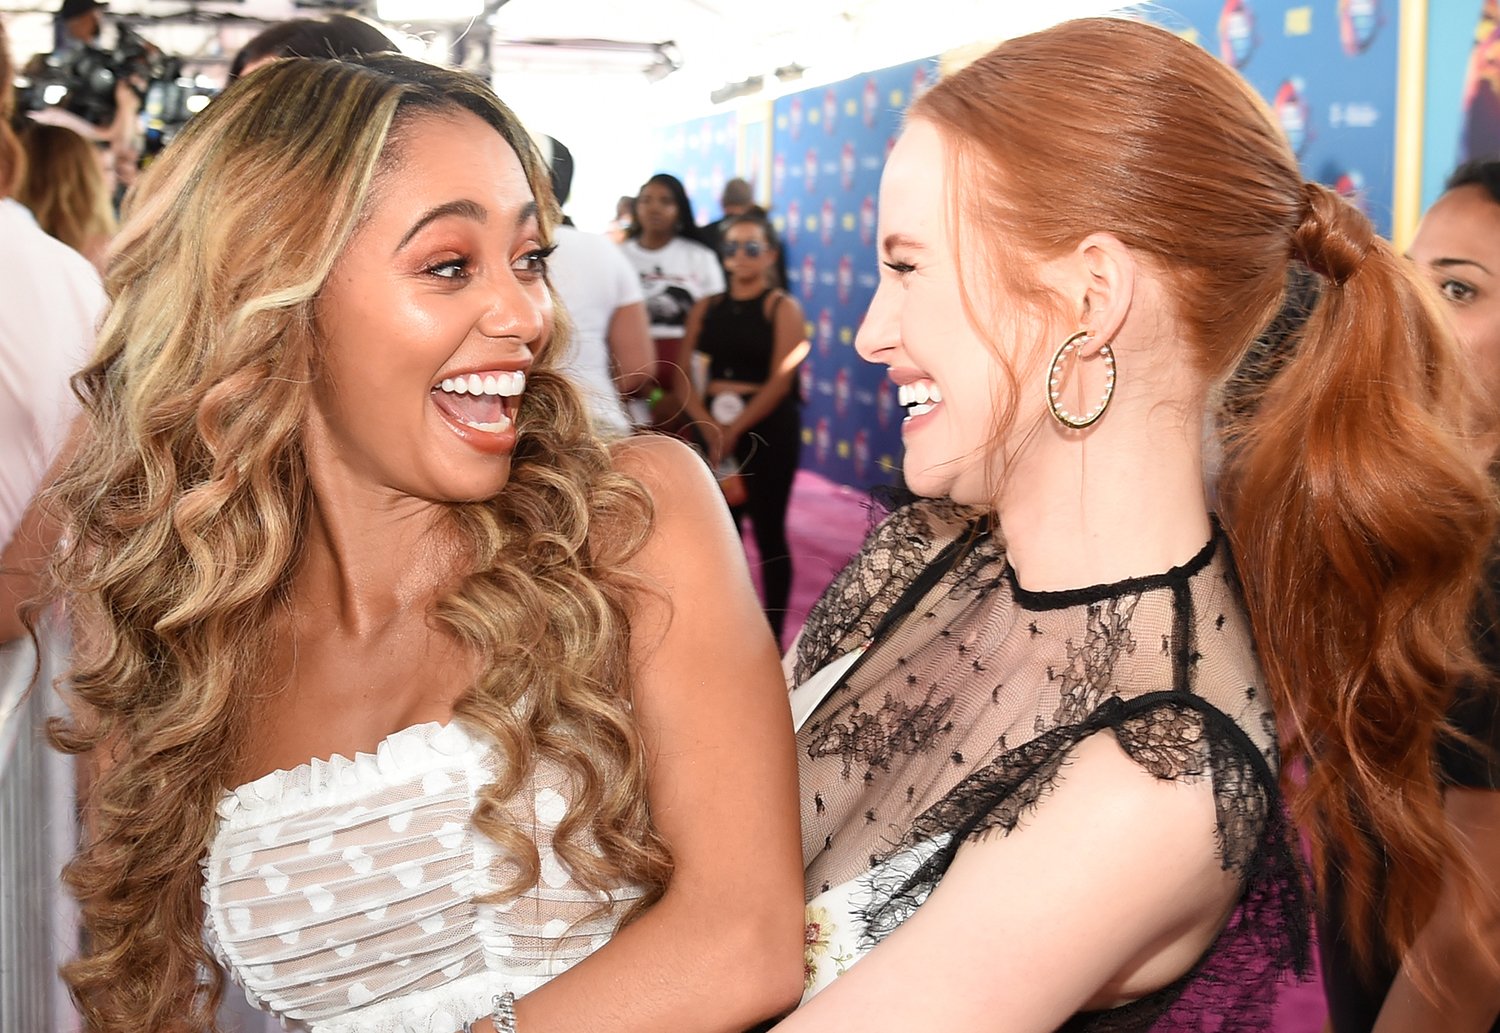 Riverdale stars Vanessa Morgan, who plays Toni Topaz, and Madelaine Petsch, who plays Cheryl Blossom, hugging at the 2018 Teen Choice Awards